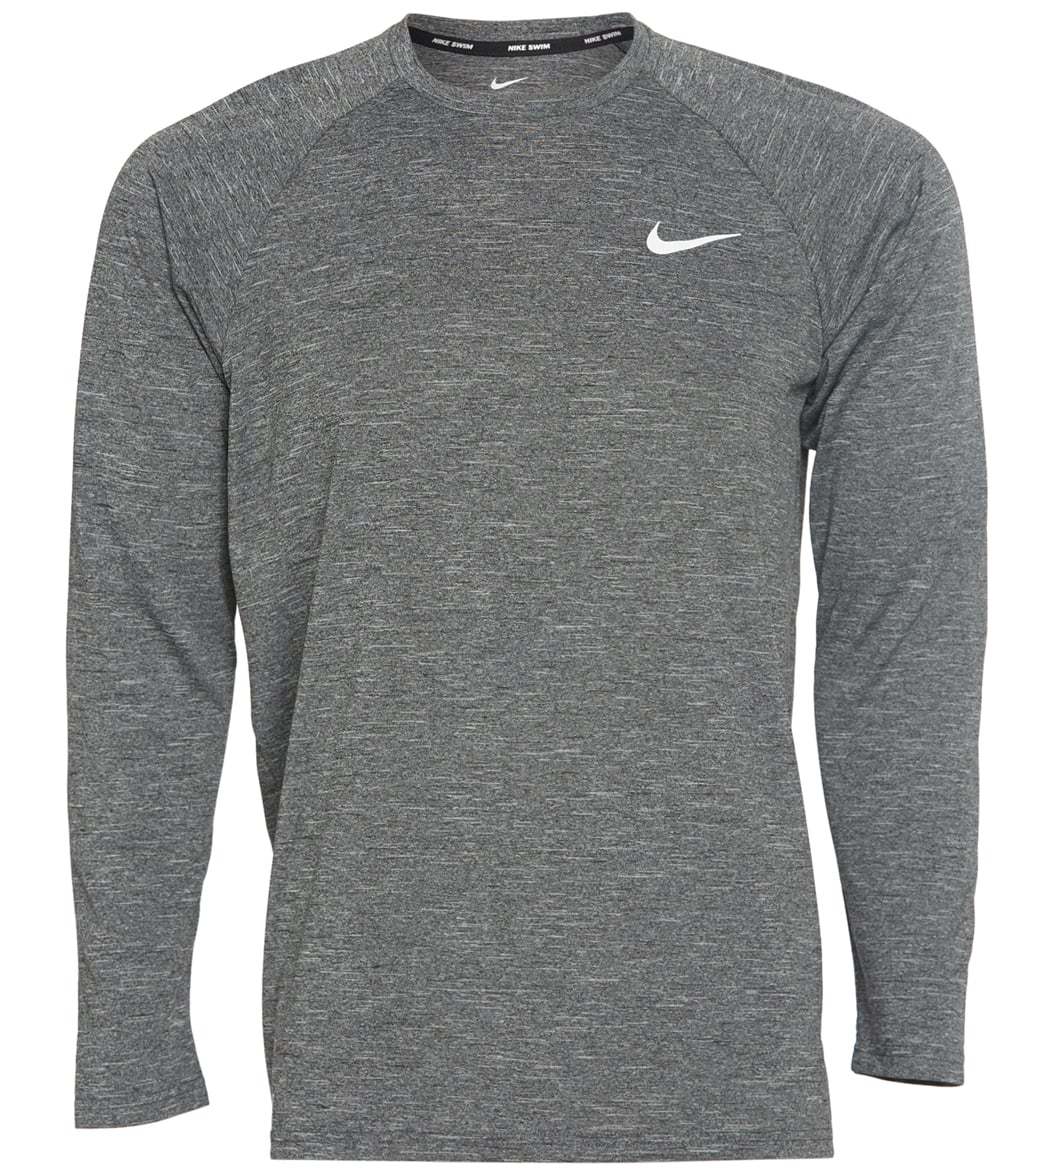 Nike Men's Heather Long Sleeve Hydroguard at SwimOutlet.com